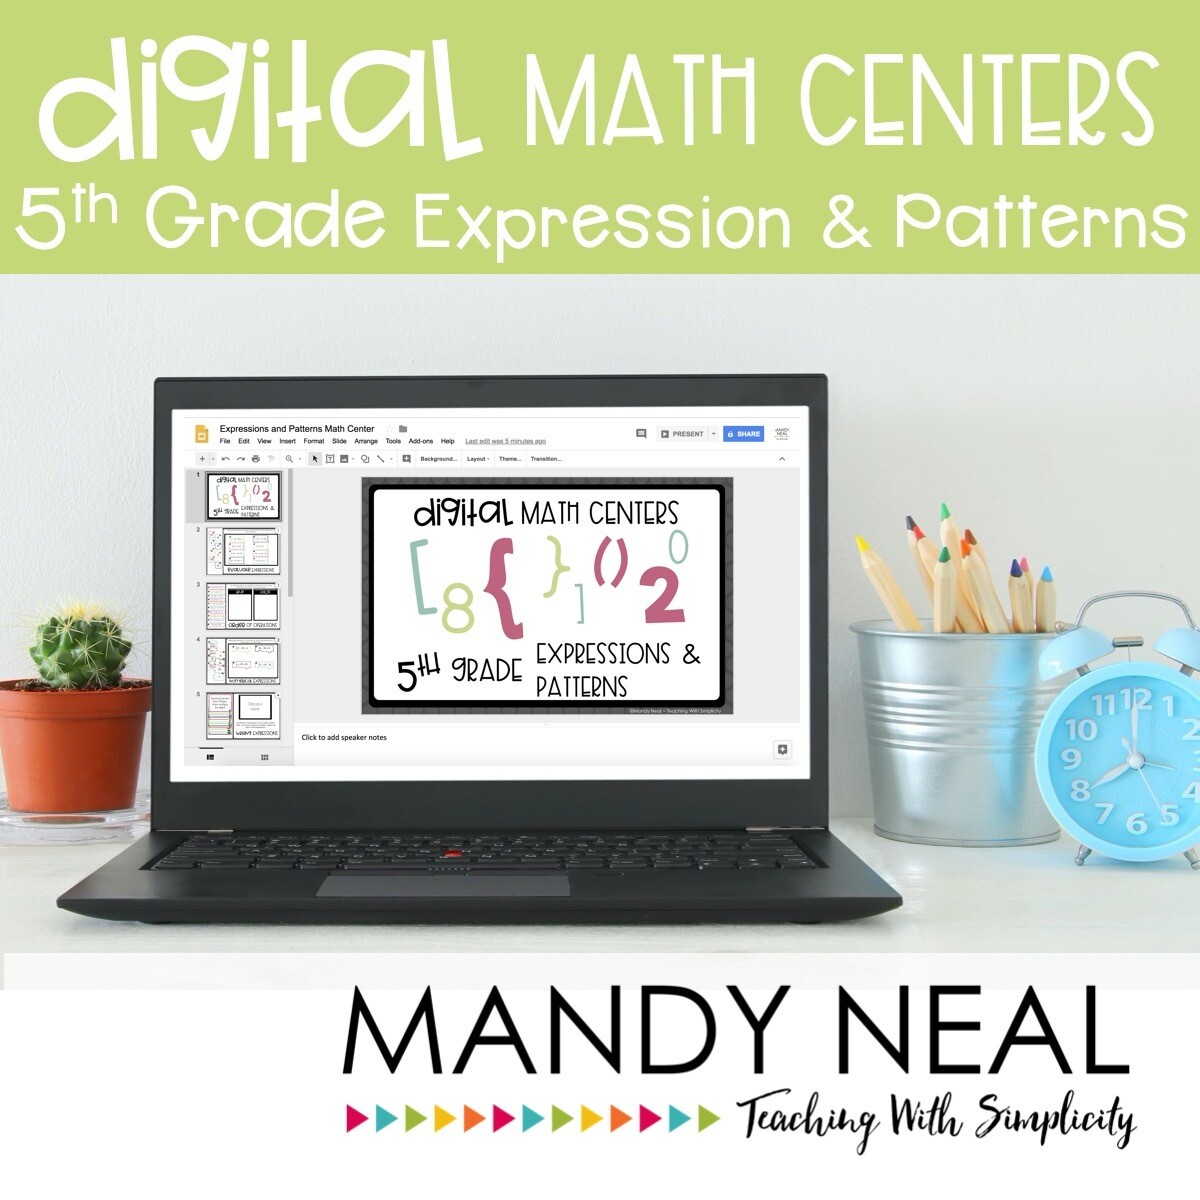 Fifth Grade Digital Math Centers Expressions & Patterns